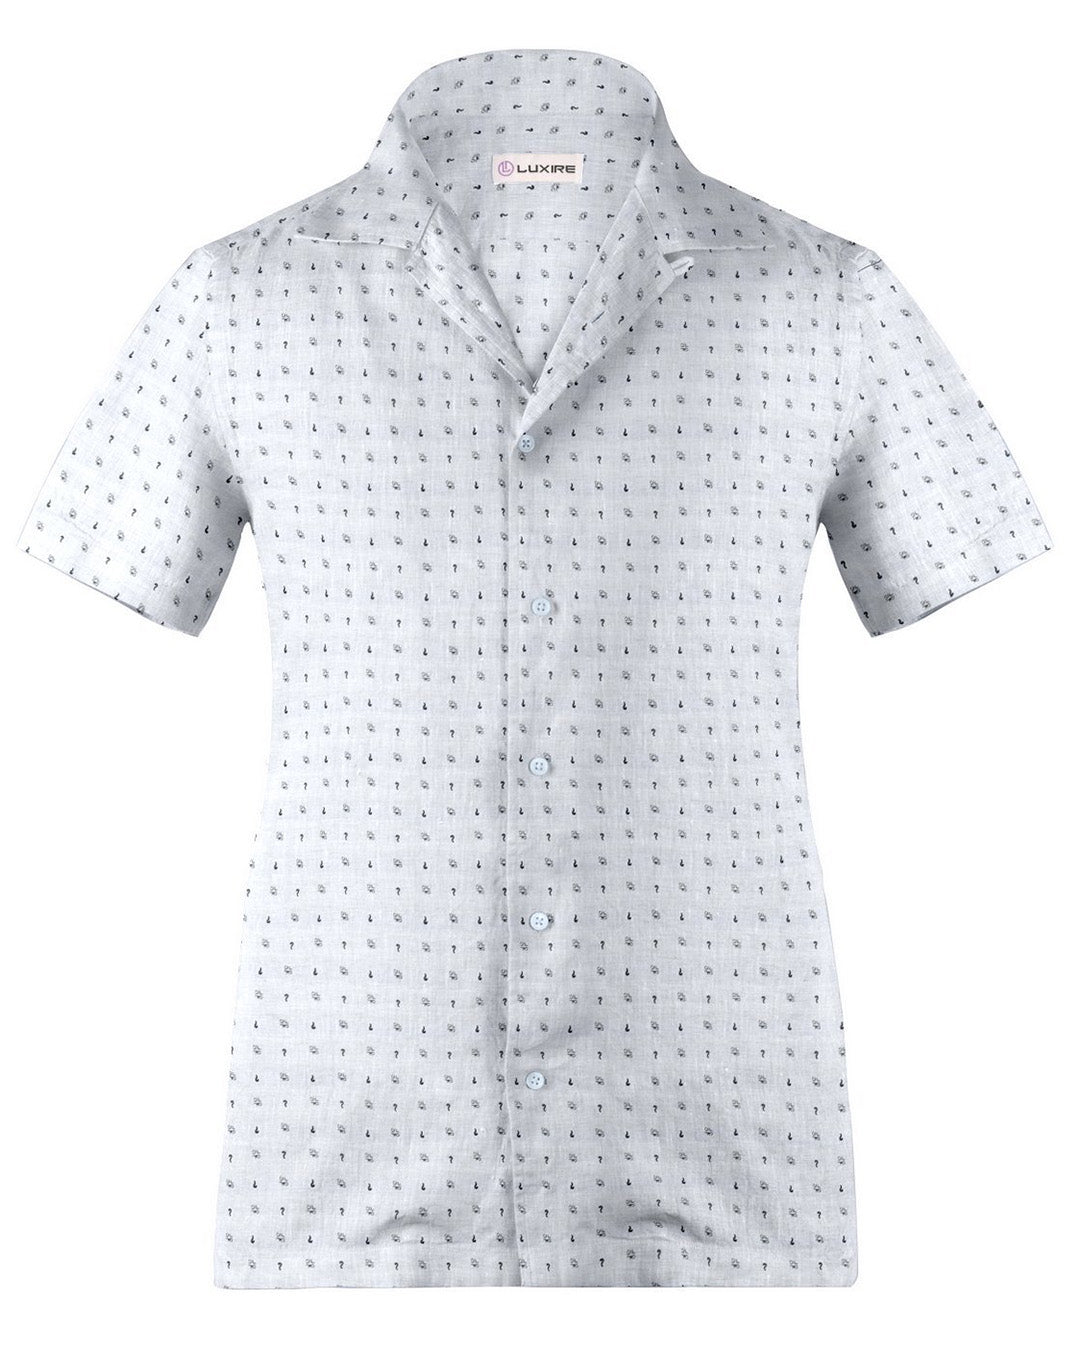 Camp collar PRESET STYLE in Linen: Grey Printed Marks On White